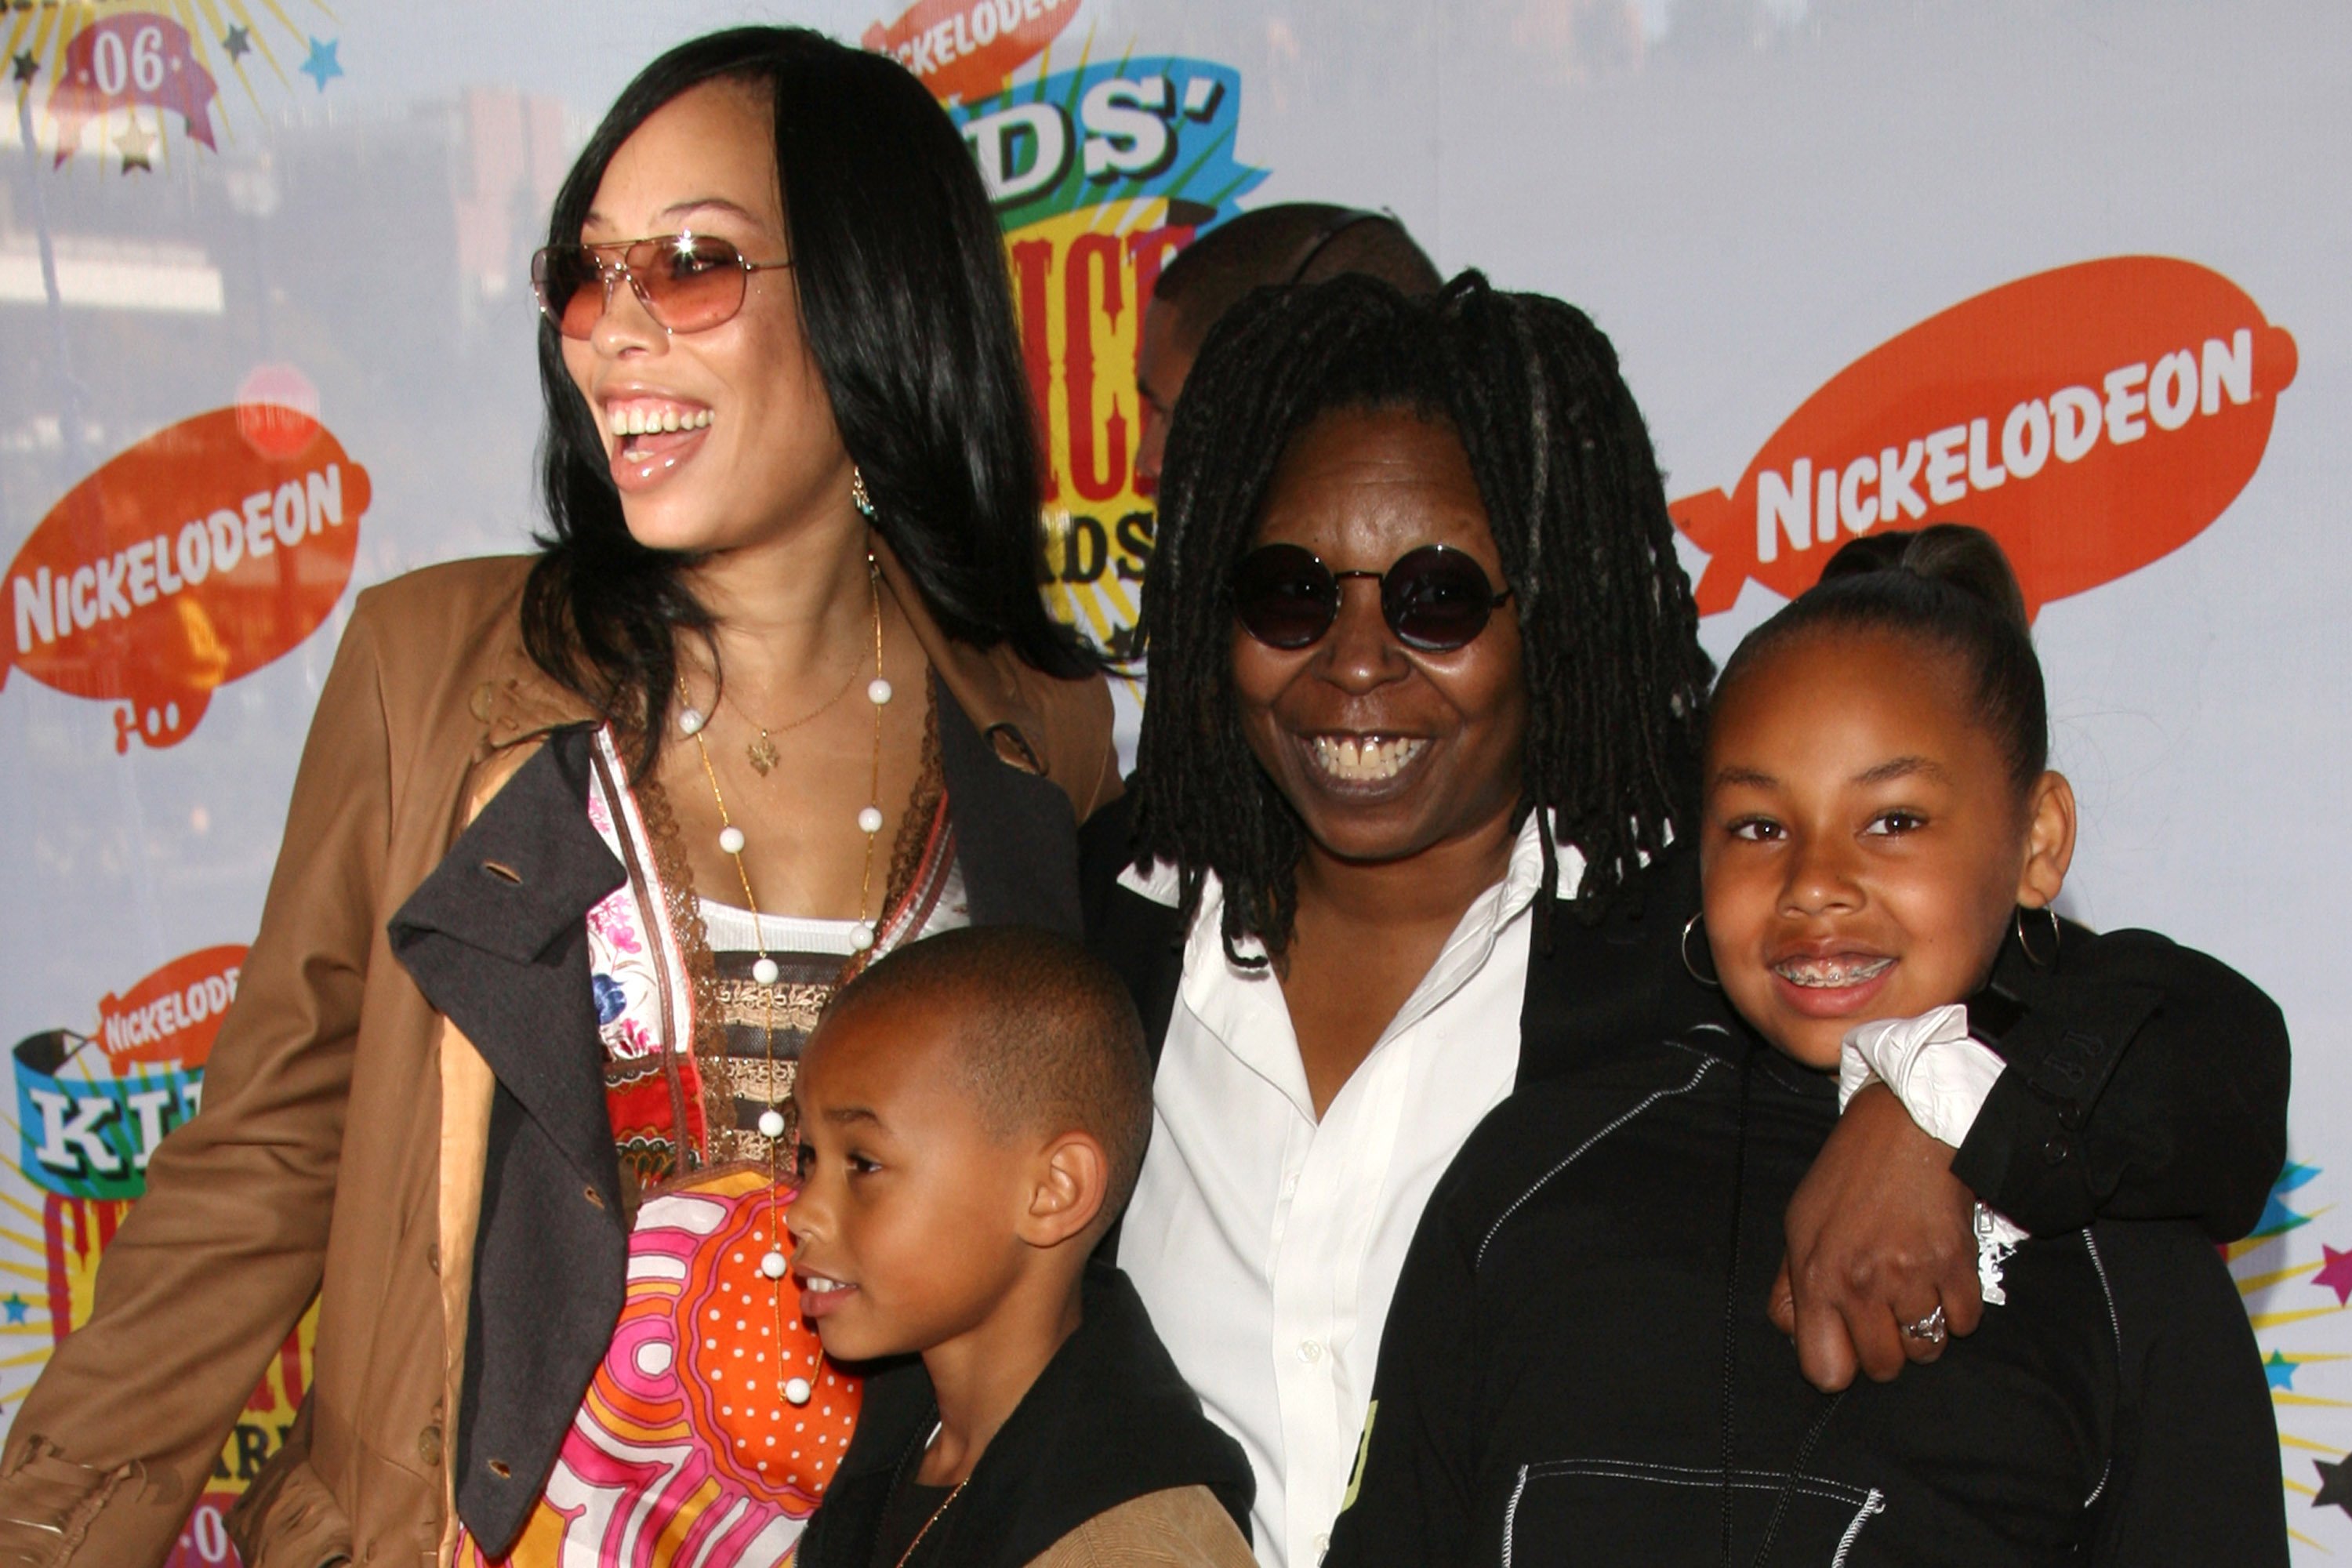 Whoopi Goldberg, Alex Martin, Mason Dean and Amarah Dean at Nickelodeon's 19th Annual Kids' Choice Awards, 2006 at Pauley Pavilion in Westwood, CA, United States |Source: Getty Images